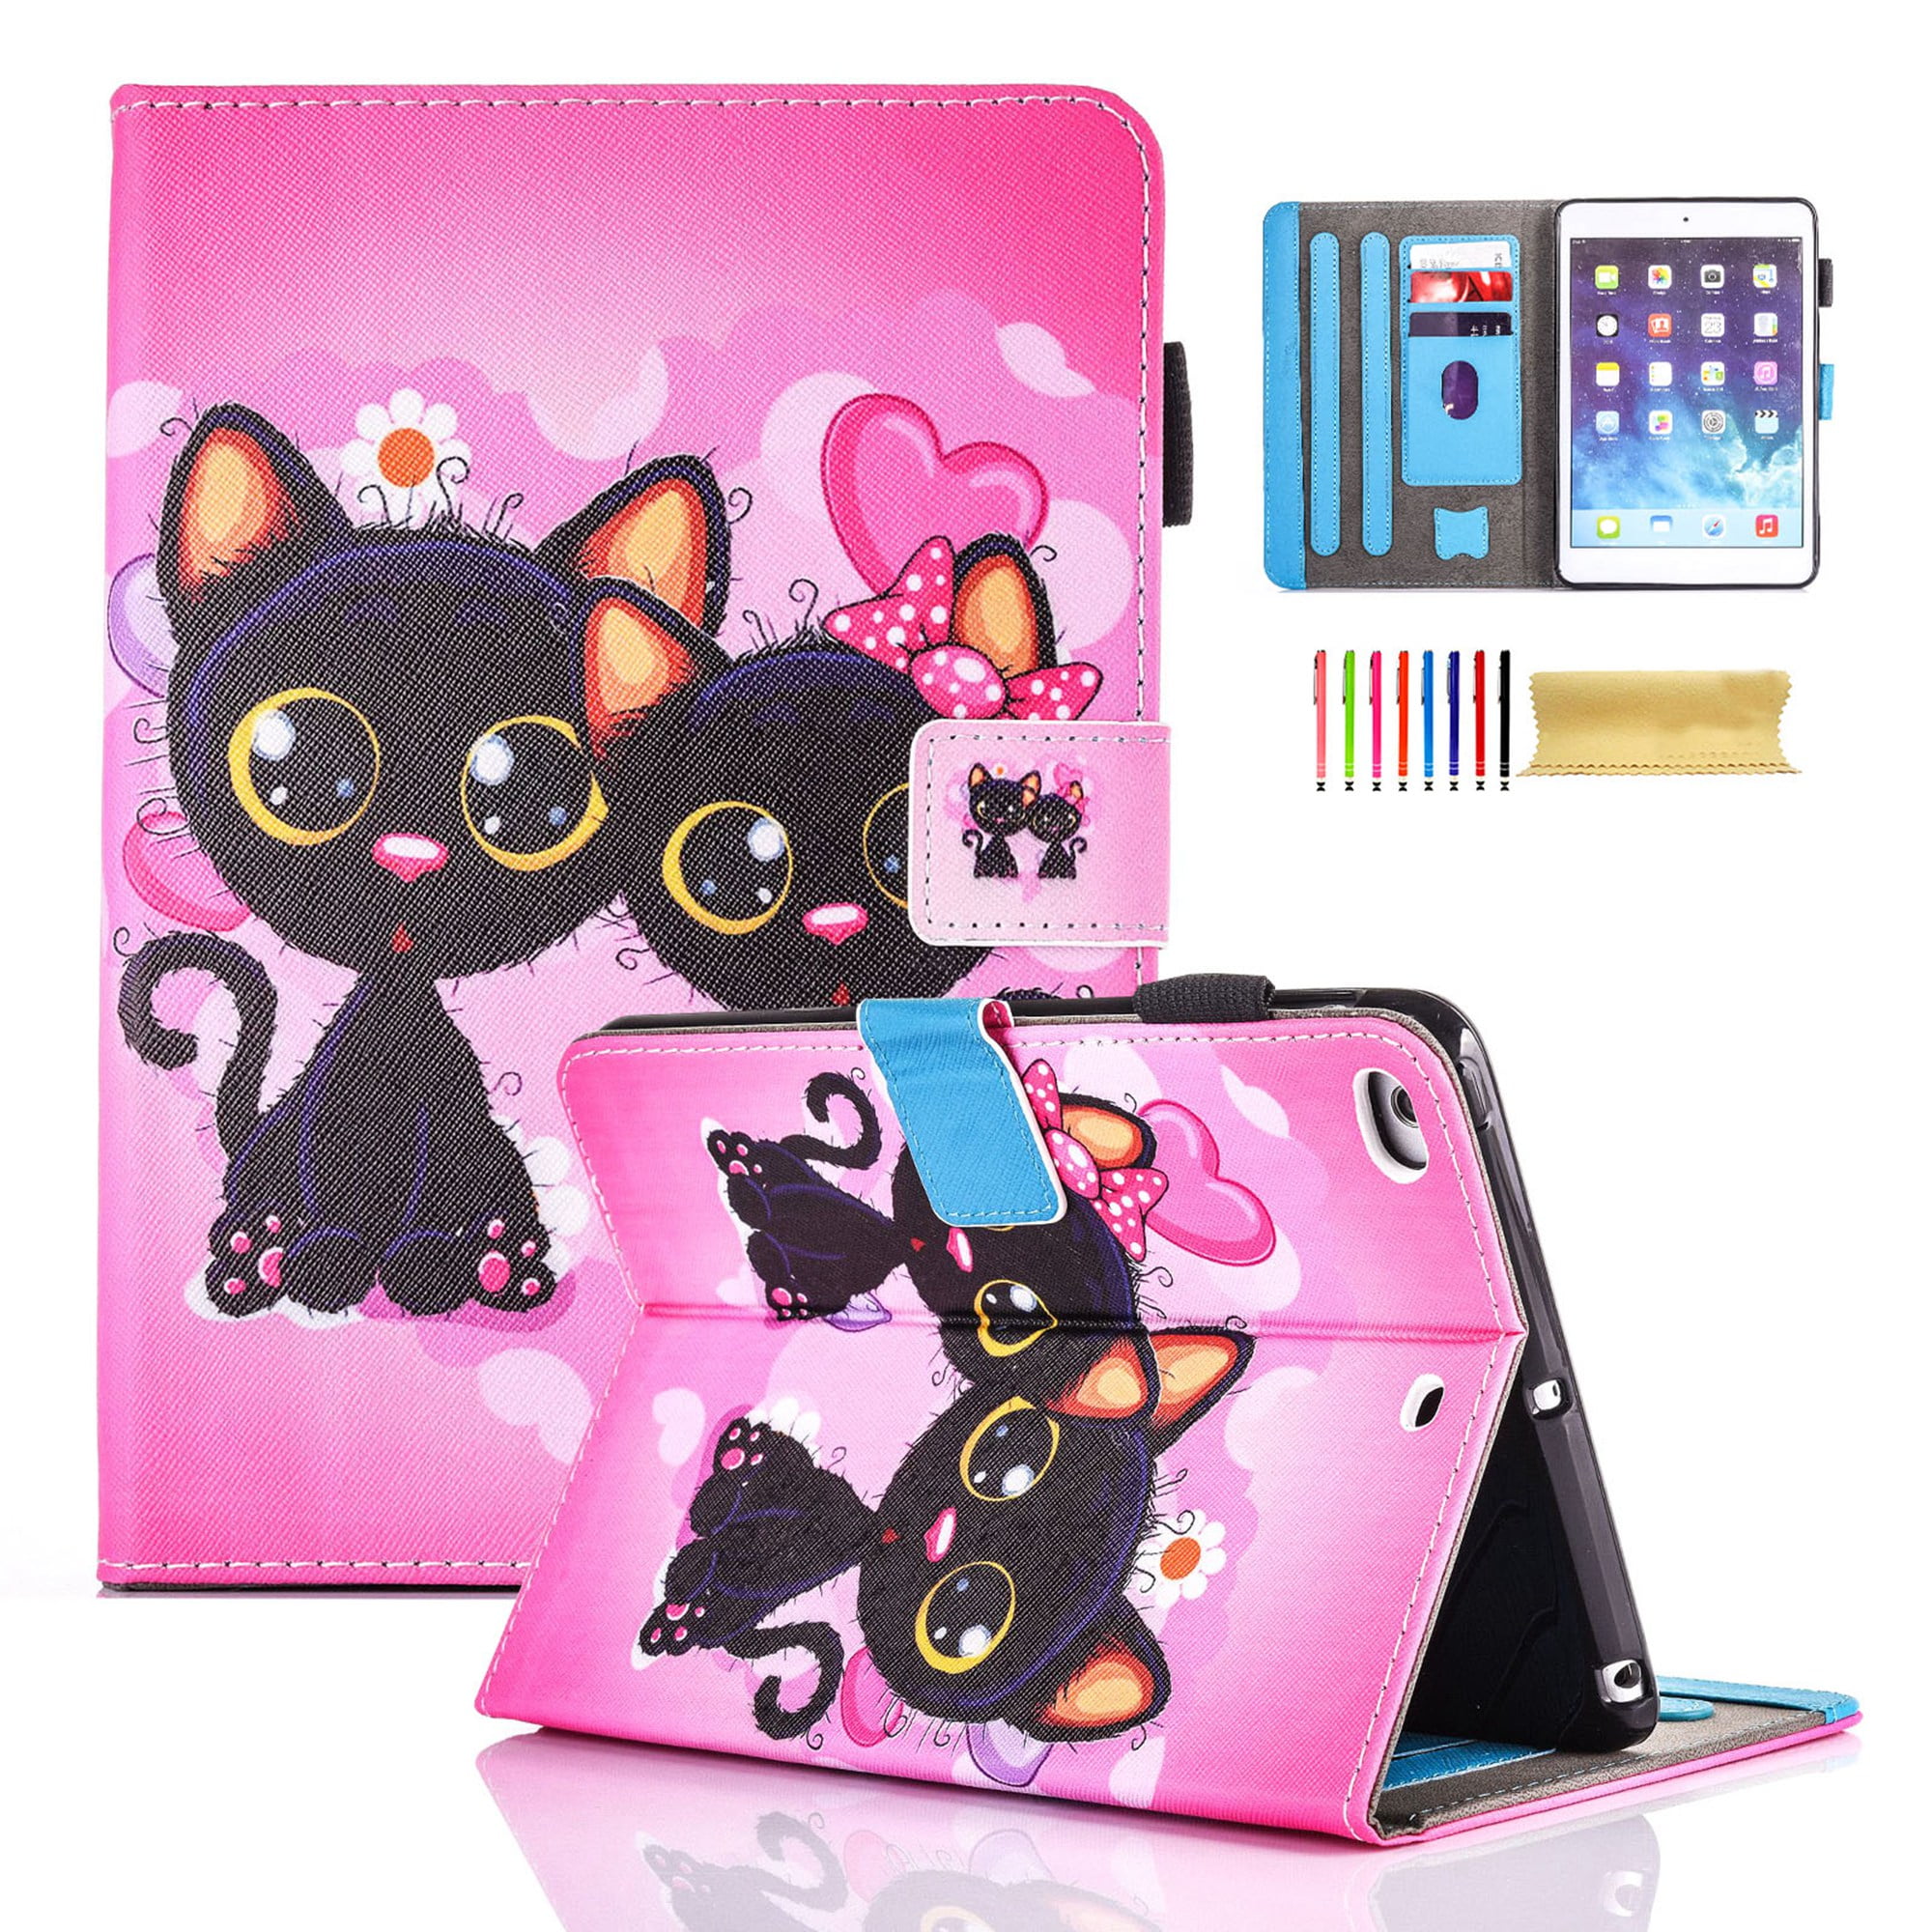 Flip Case for New iPad 9.7 2017,Smart Leather Cover for New iPad 9.7 2017,Herzzer Retro Pretty Tree Butterfly Cat Design Wallet Folio Case Full Body PU Leather Protective Stand Cover with Inner Soft Silicone Shell for New iPad 9.7 2017 1 x Free Black Cel